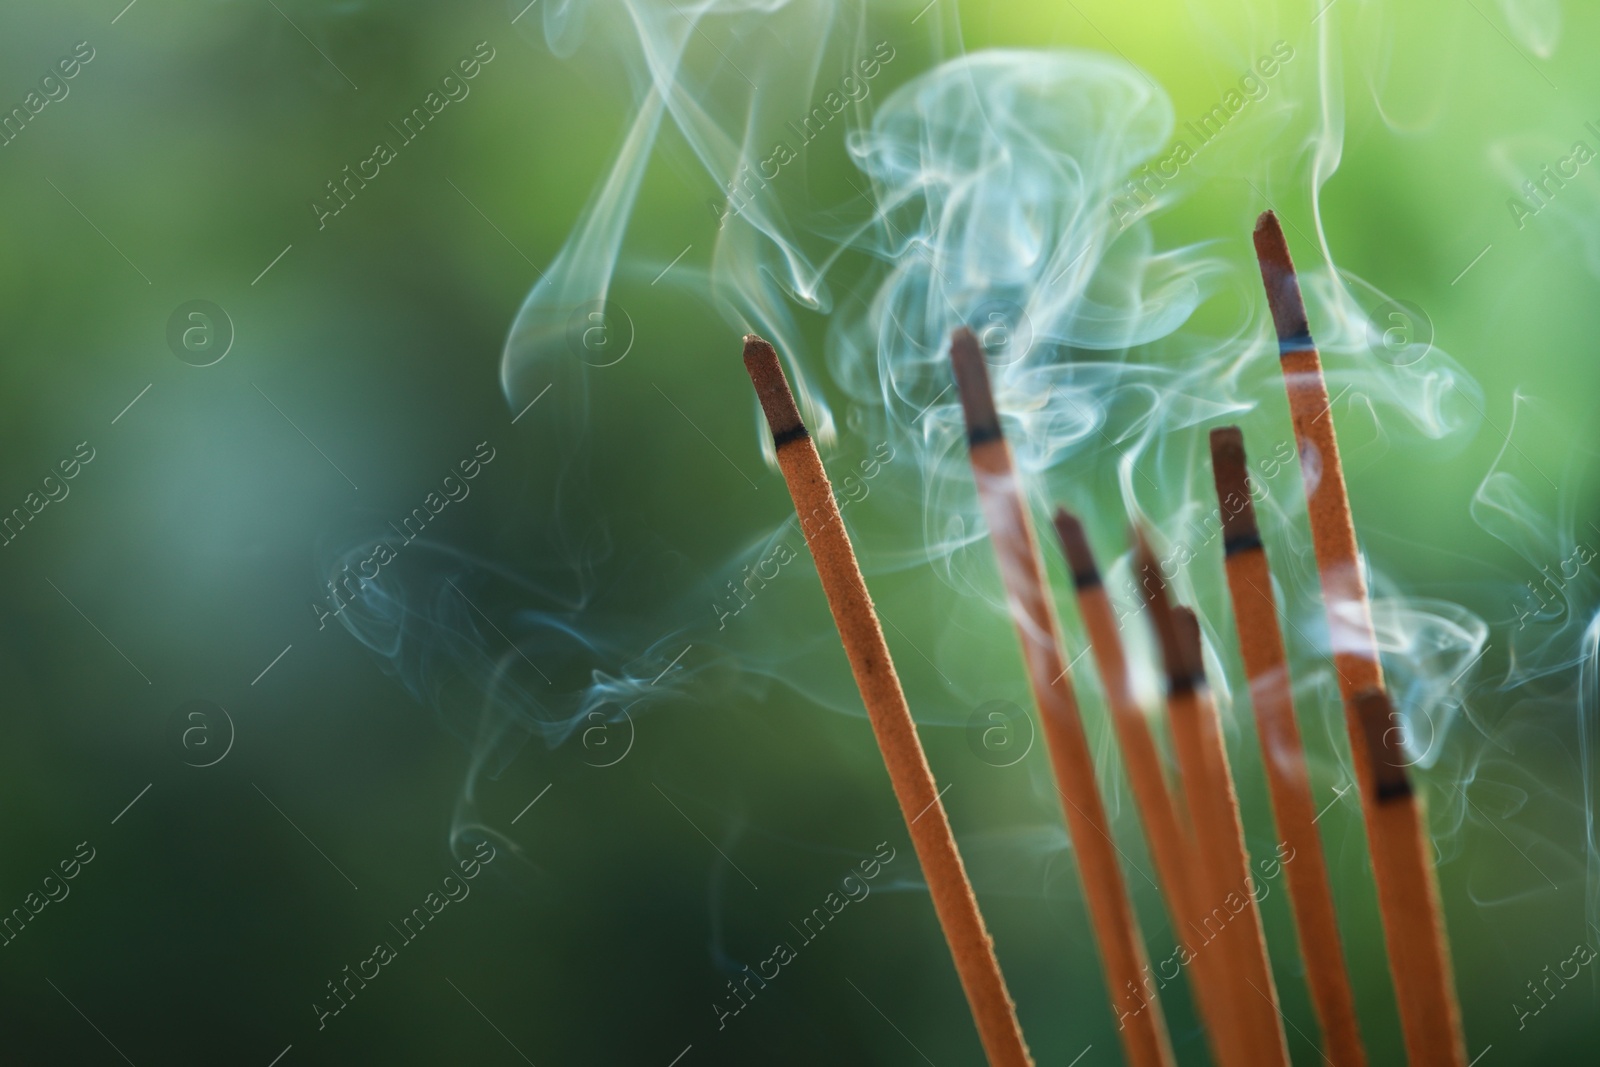 Photo of Incense sticks smoldering on green blurred background, space for text